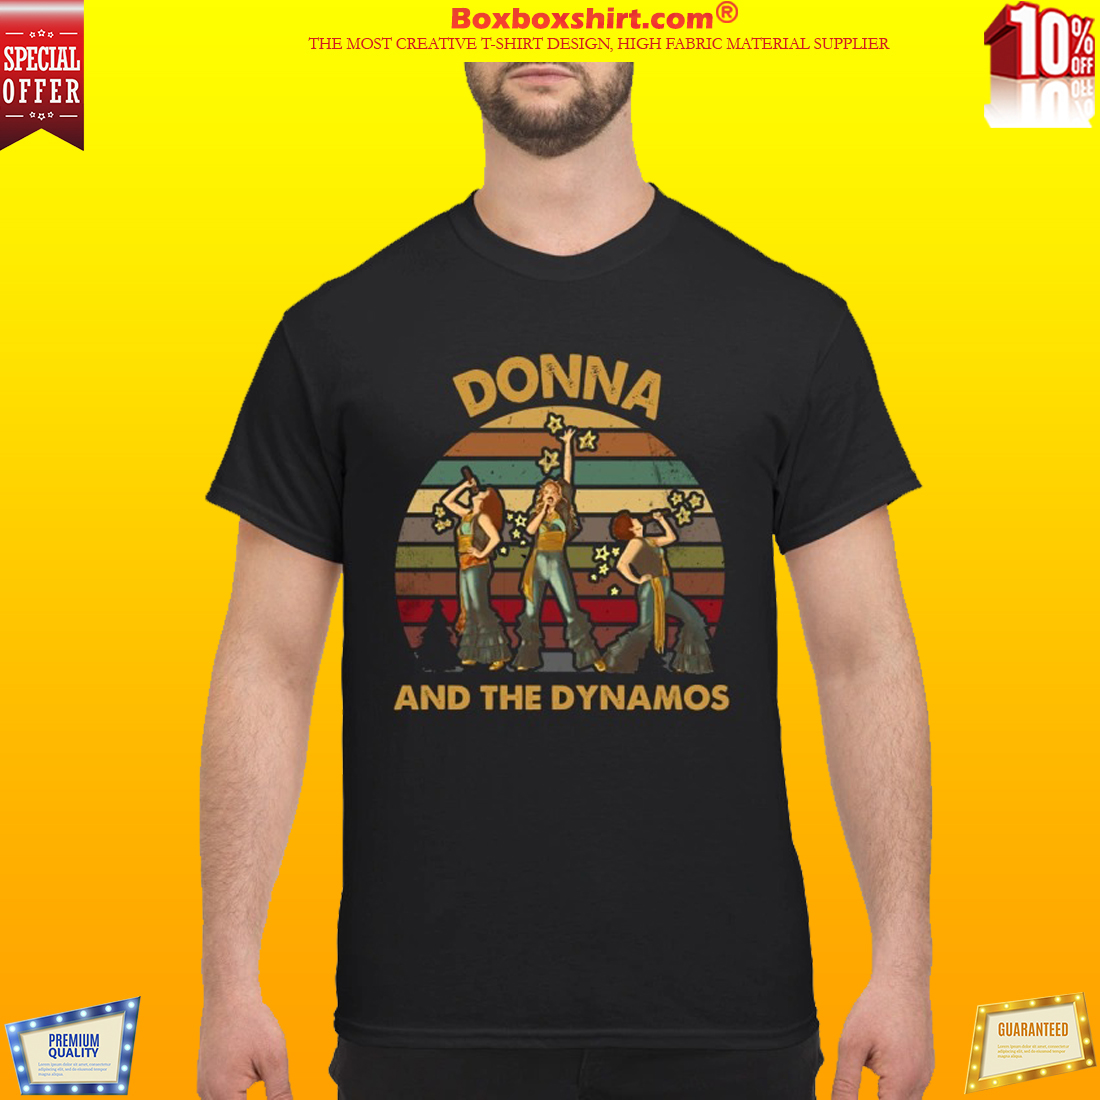 Donna and the dynamos costume classic shirt